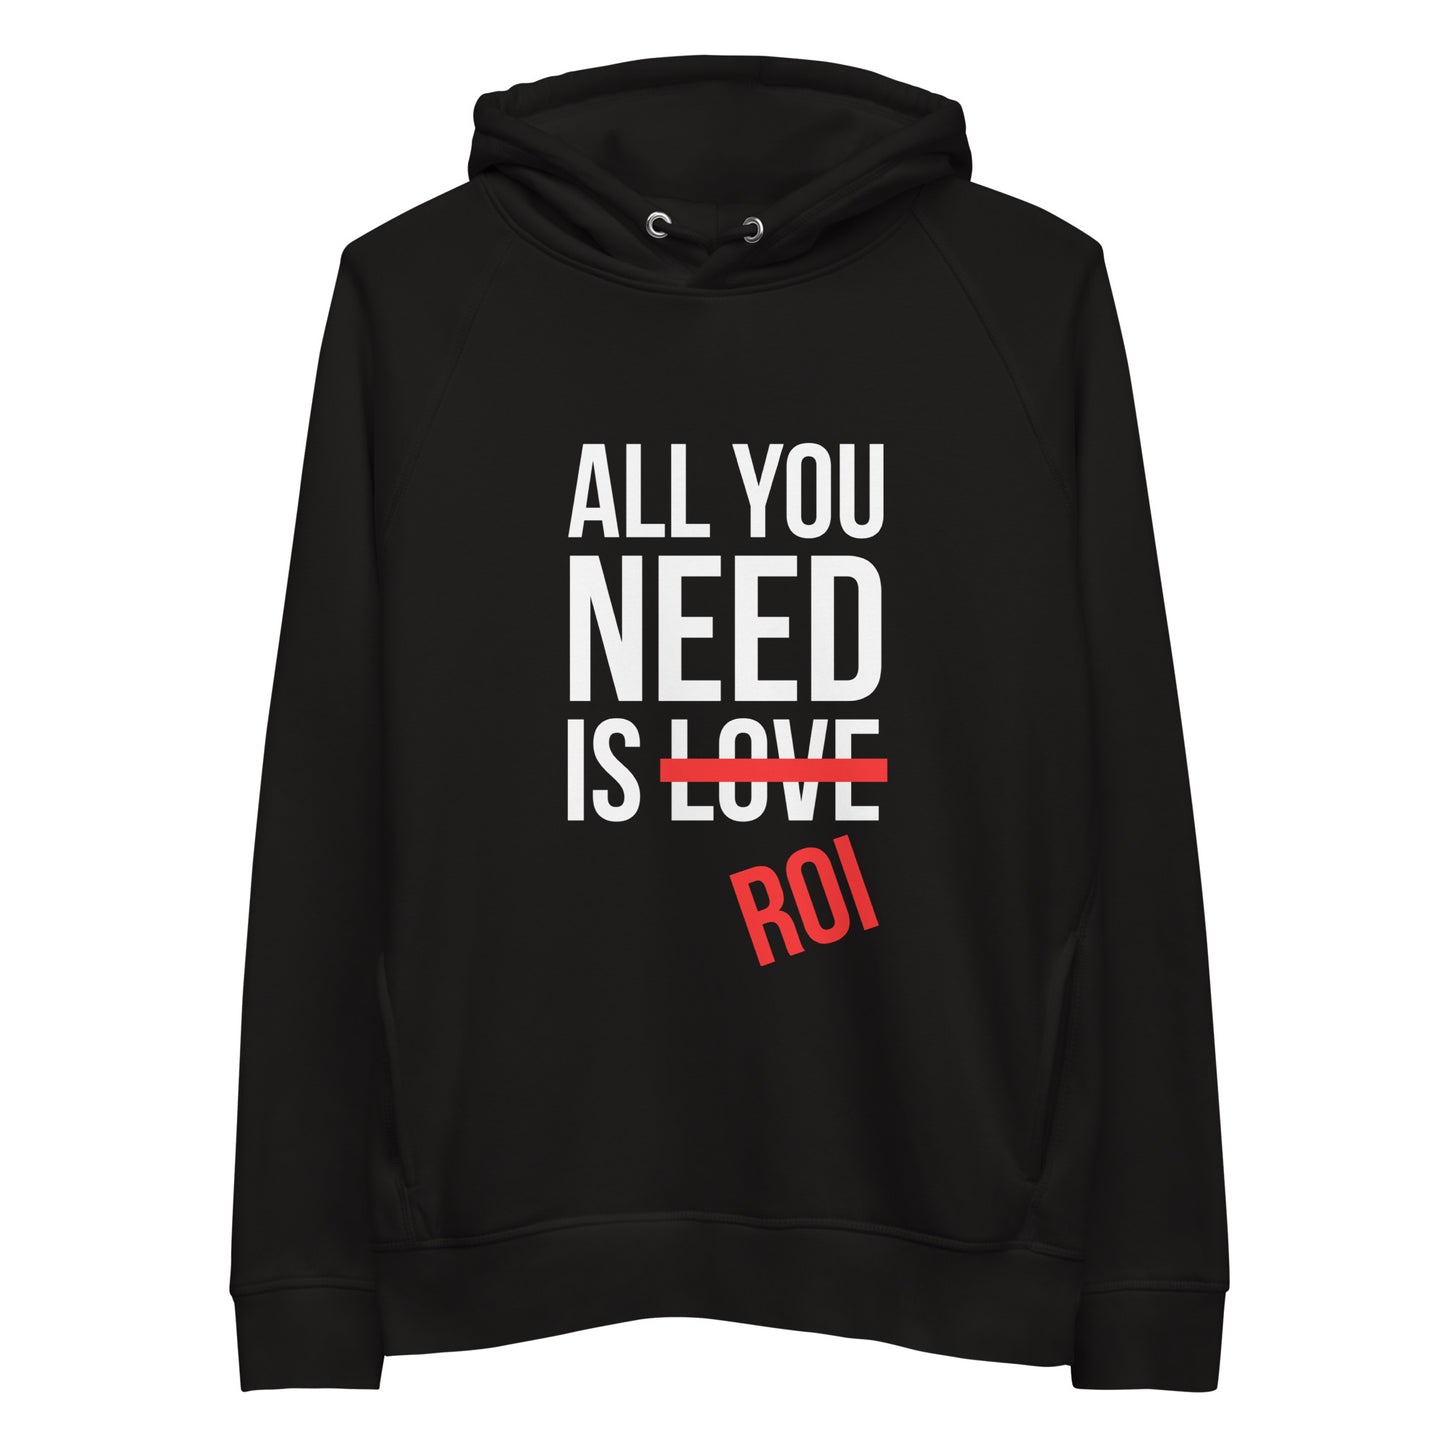 All you need it ROI hoodie